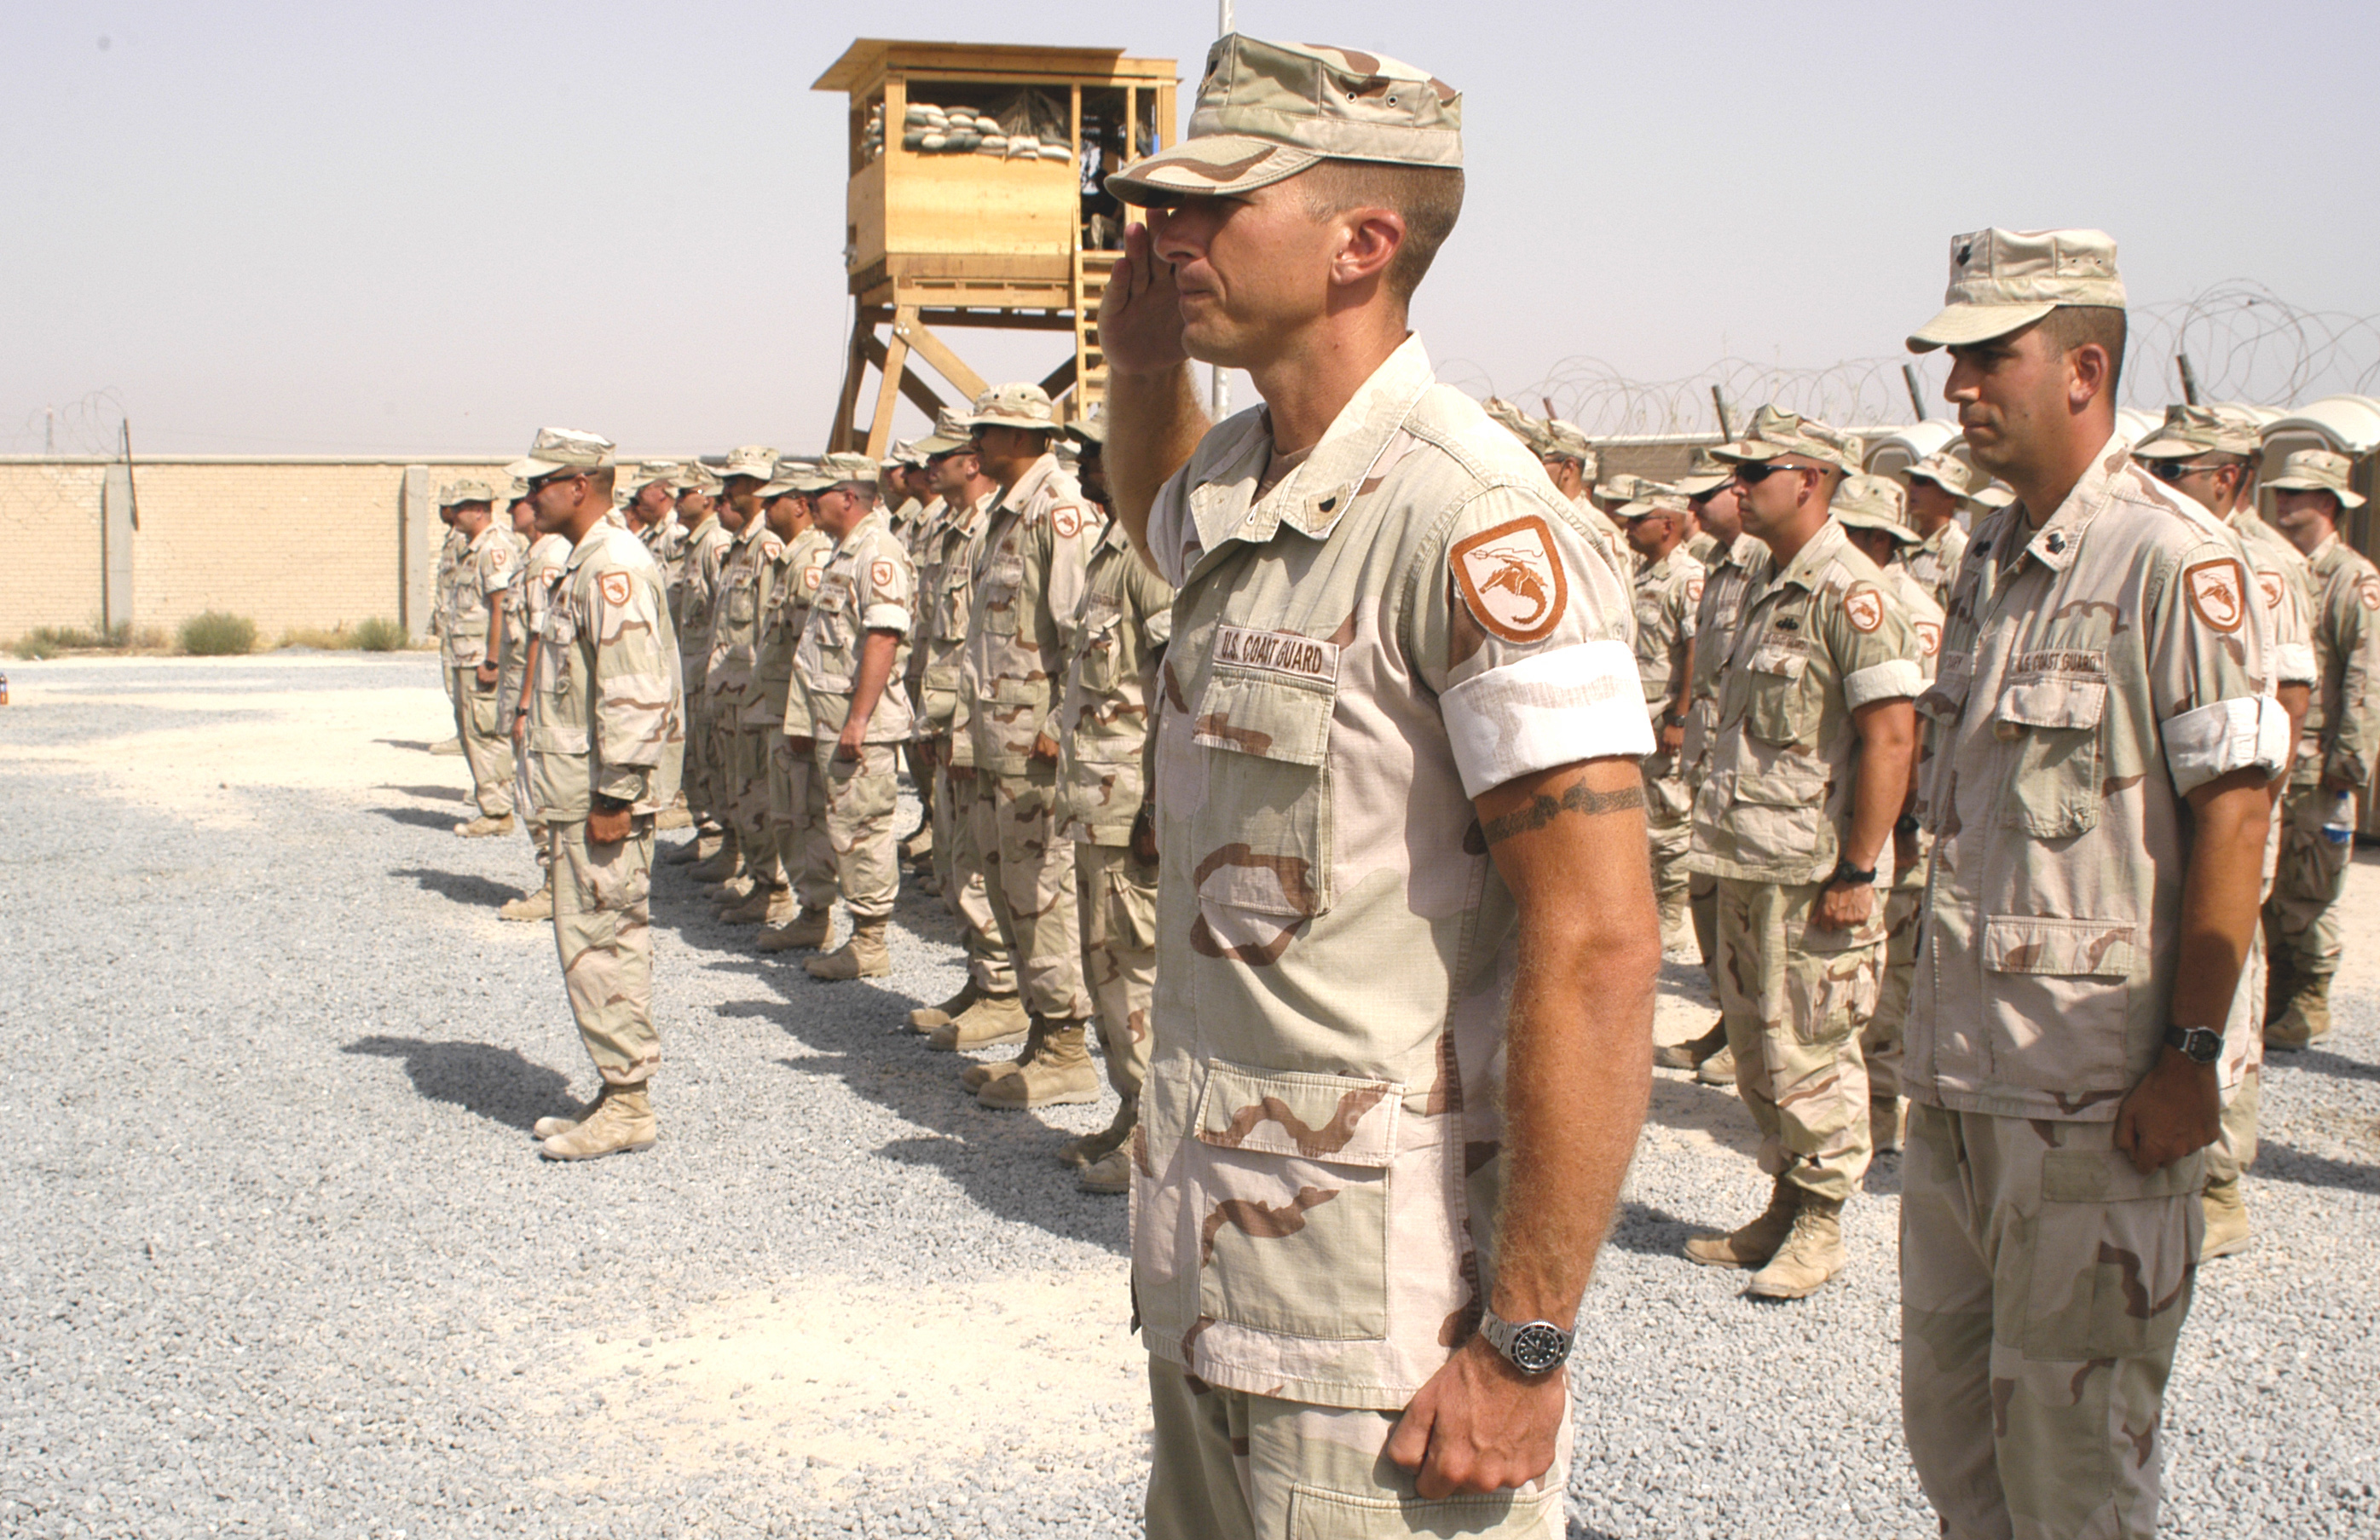 Port Security Unit 311 out of San Pedro, California, personnel in theater during Operation Iraqi Freedom. (U.S. Coast Guard)